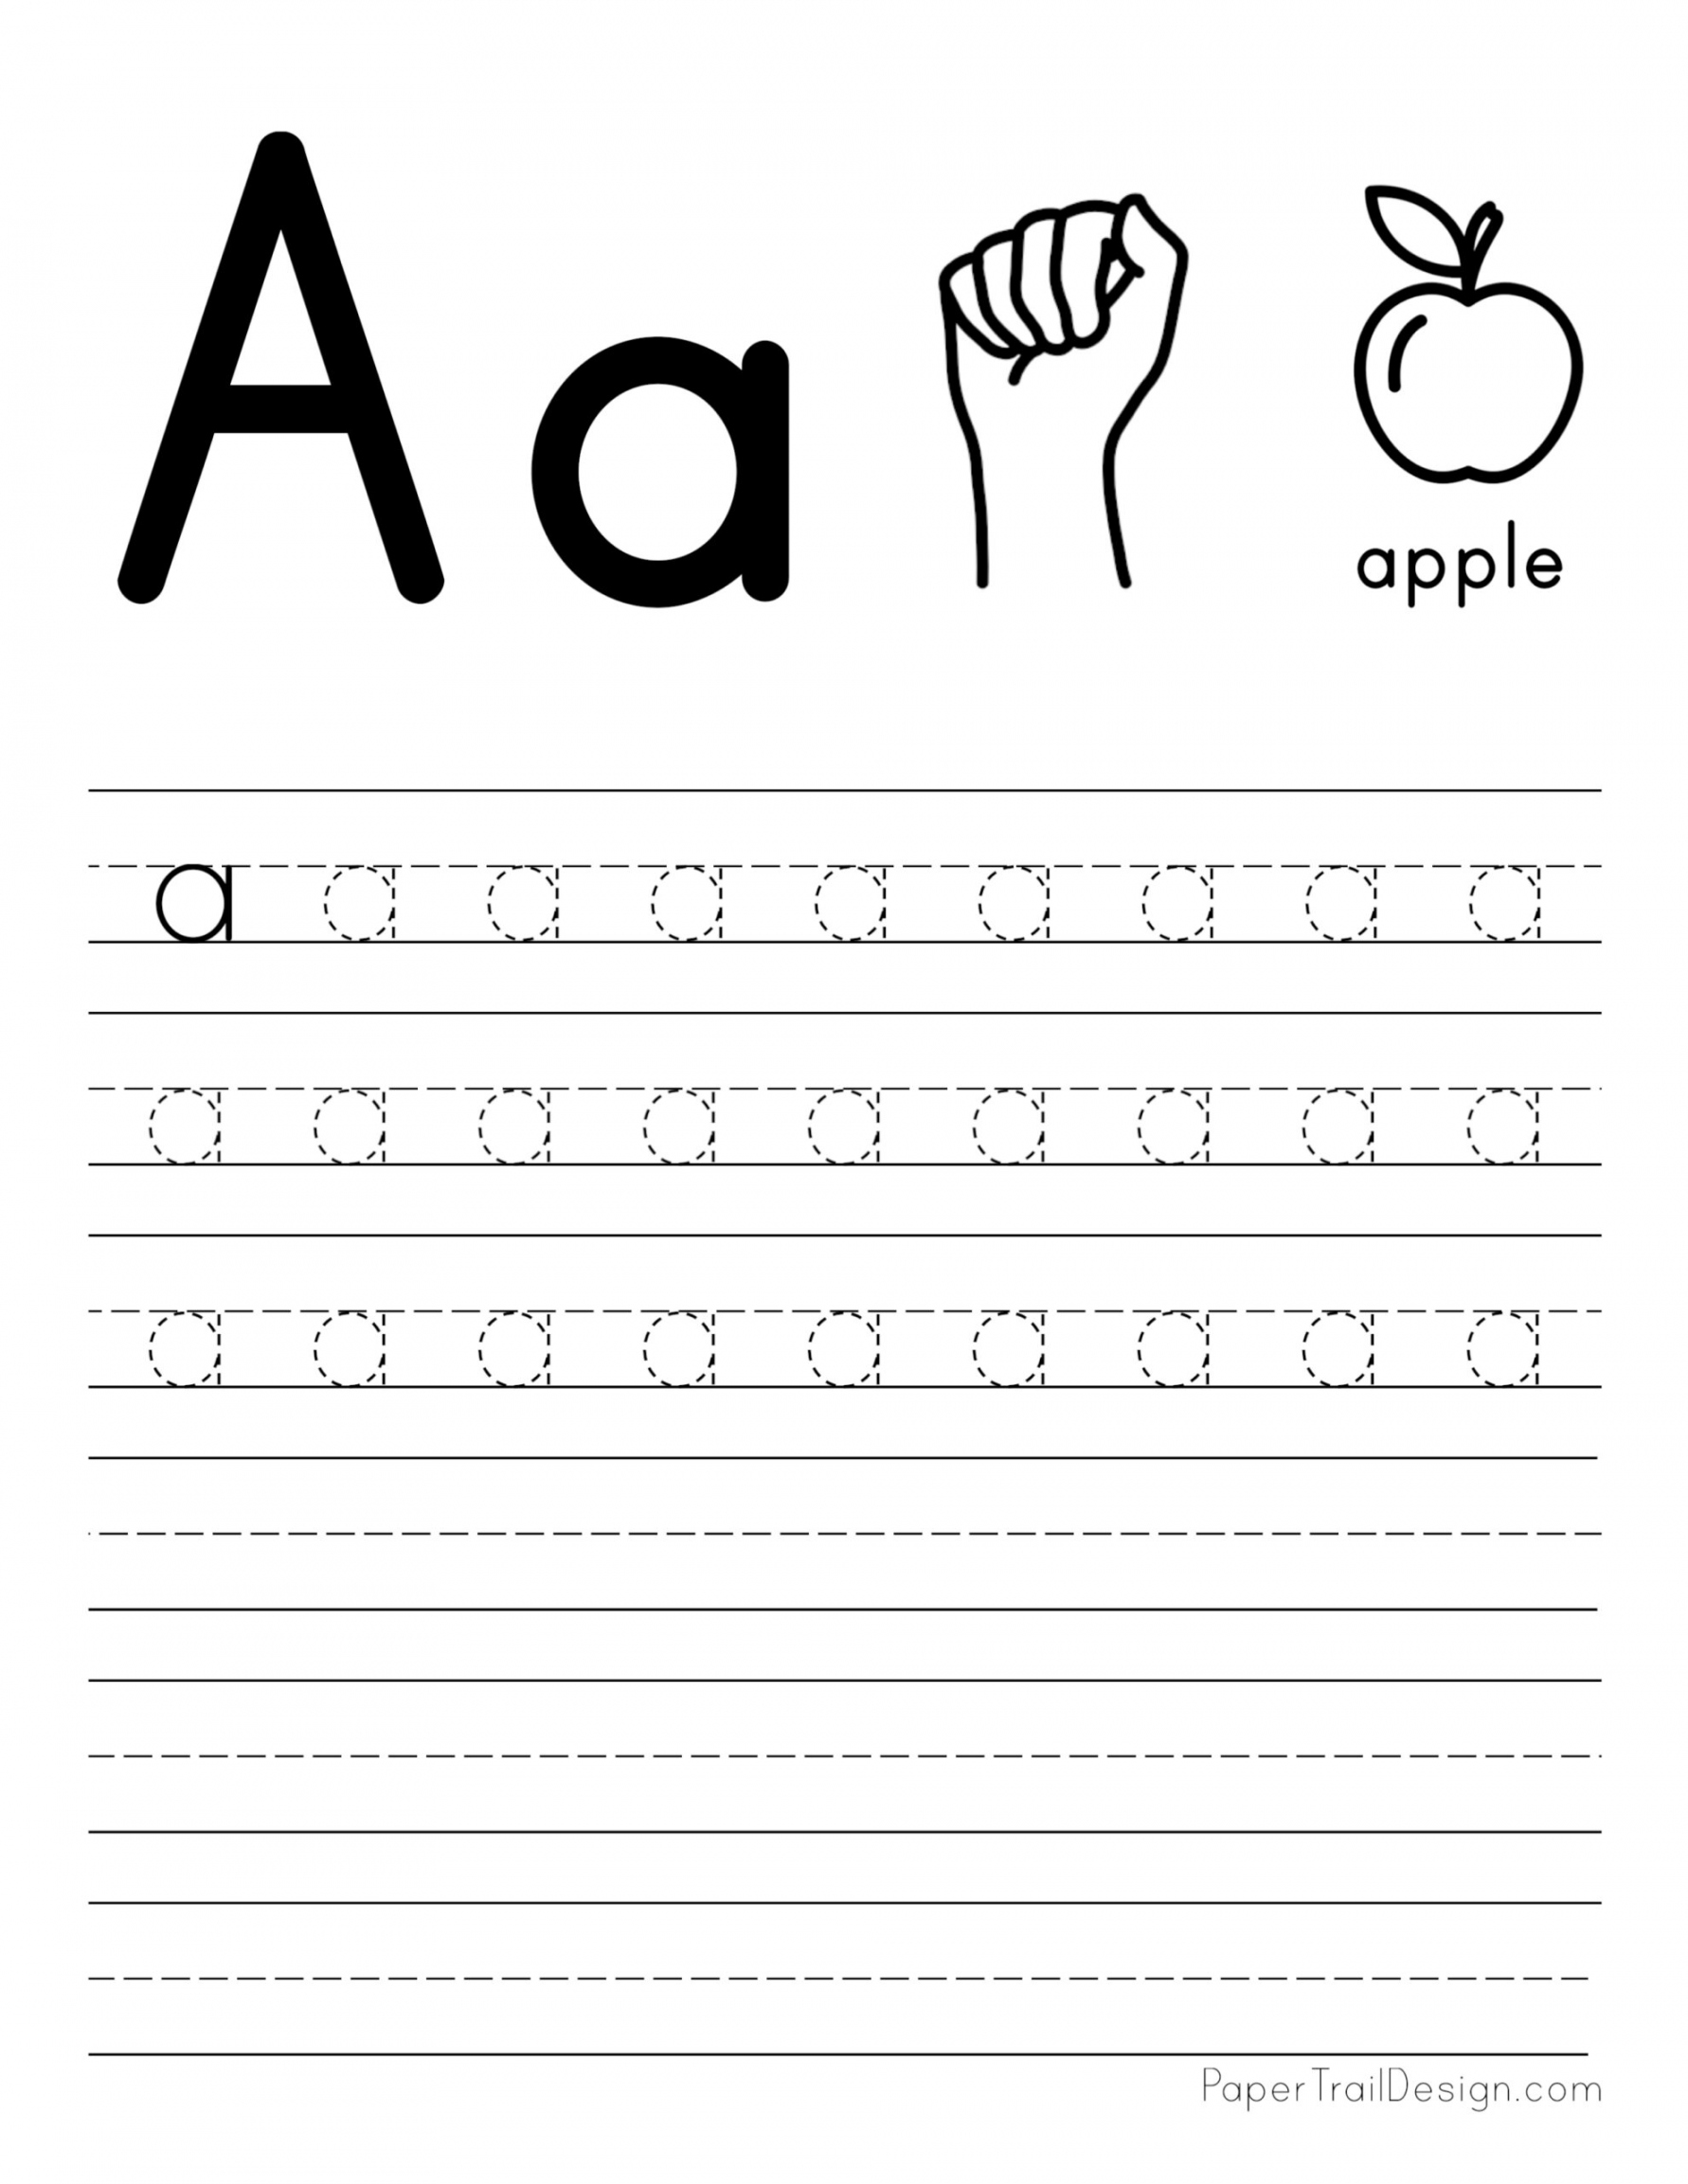 Tracing Letters Printable Free - Printable - Free Letter Tracing Worksheets - Paper Trail Design